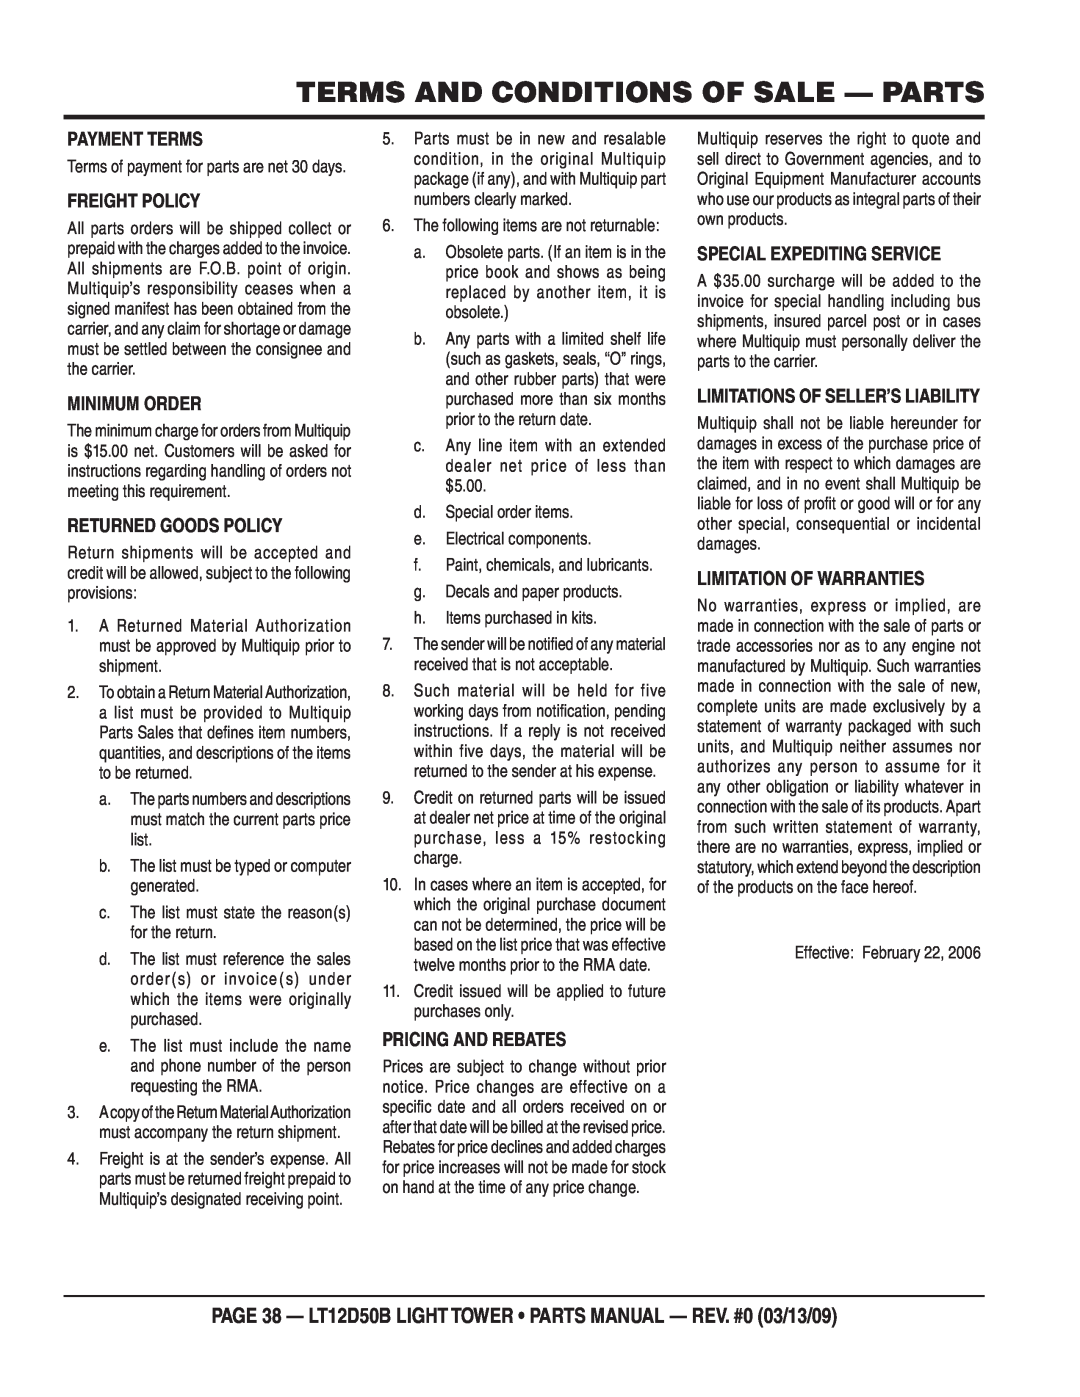 Multiquip manual Terms And Conditions Of Sale - Parts, PAGE 38 - LT12D50B LIGHT TOWER PARTS MANUAL - REV. #0 03/13/09 